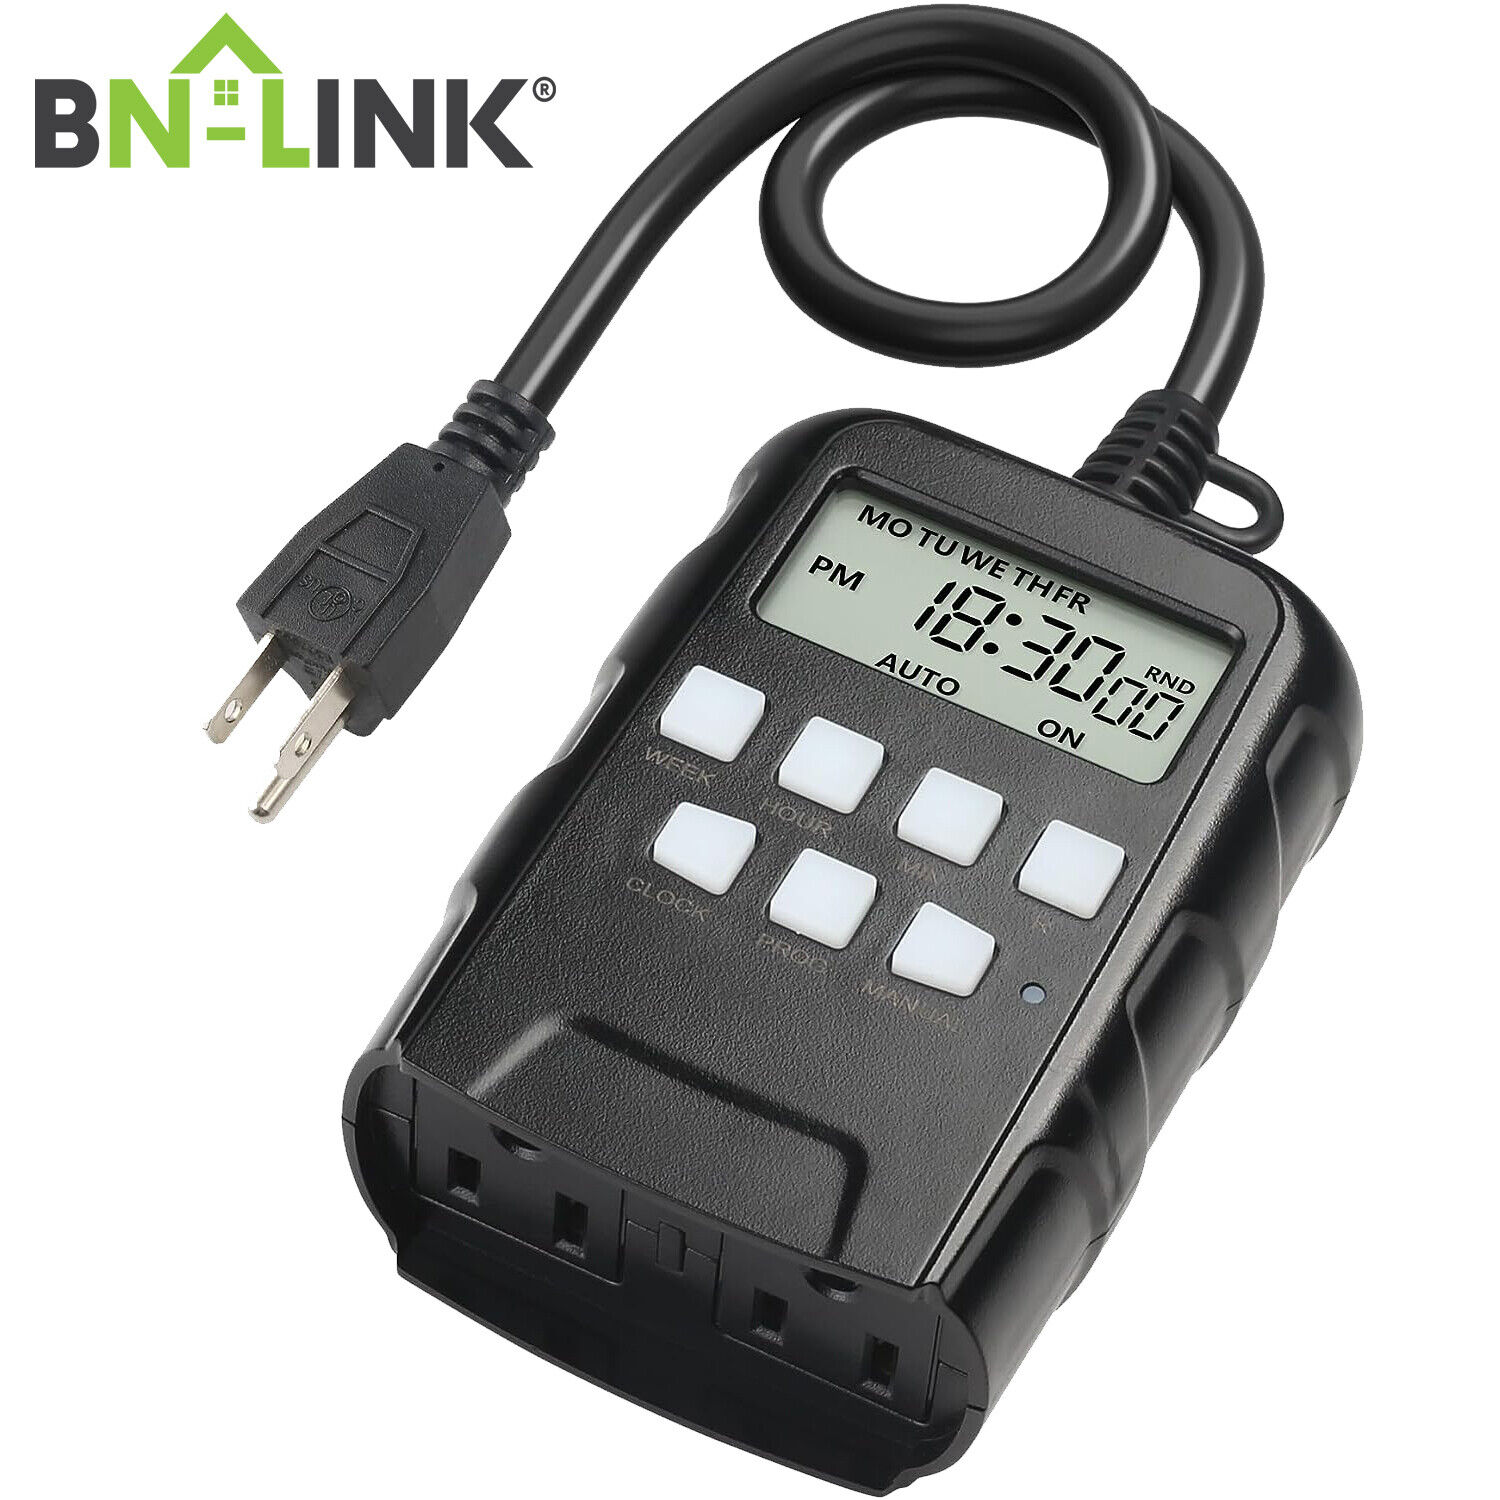 BN-LINK 7 Day Outdoor Heavy Duty Digital Programmable Timer Dual Outlet 8 On/Off